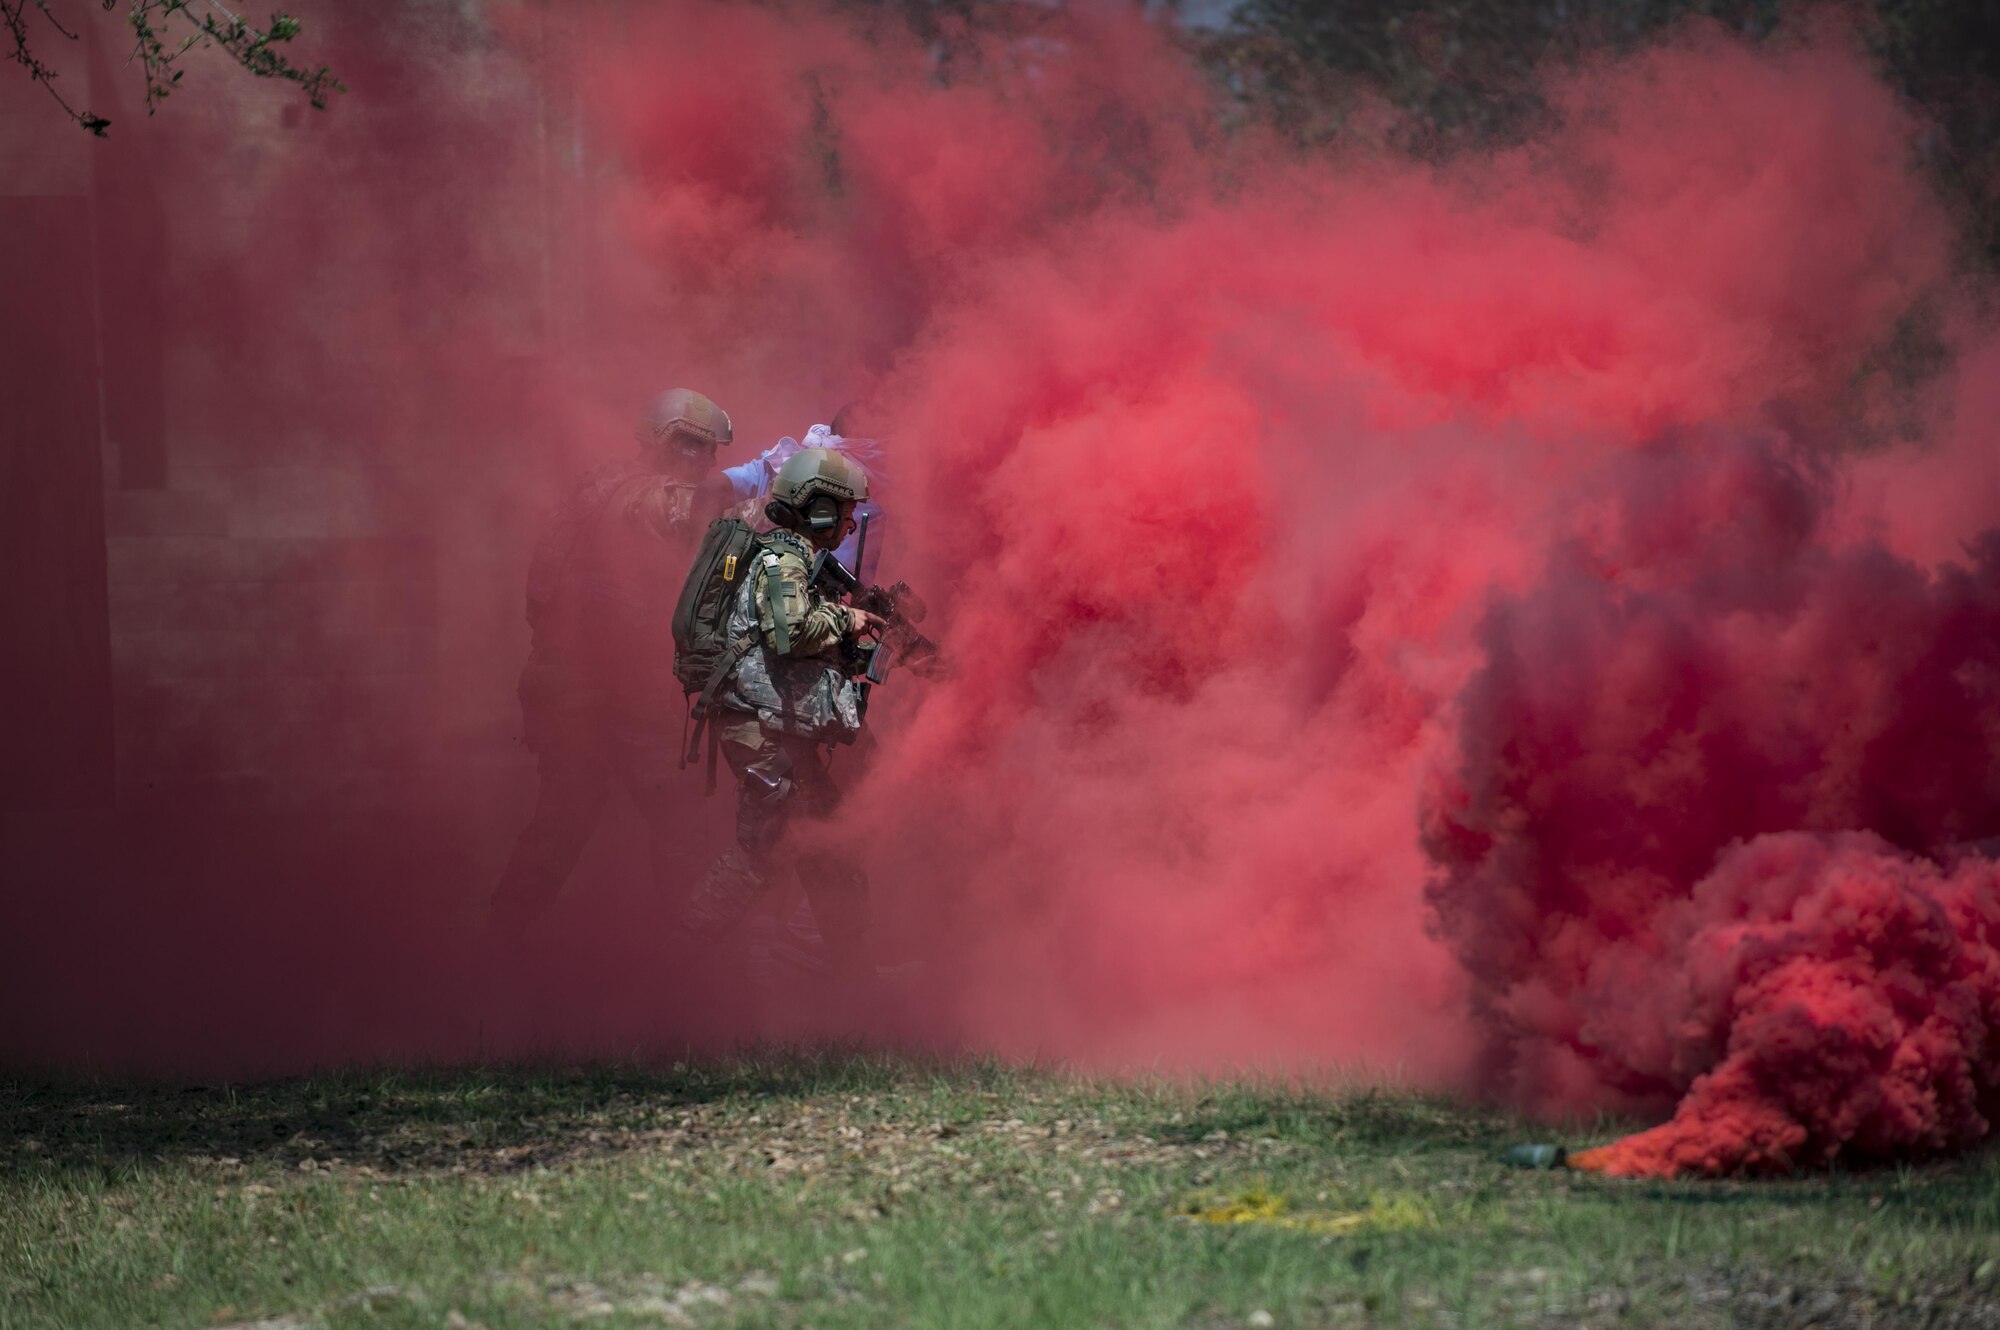 Airmen from the 820th Base Defense Group escort a simulated enemy during a tactical demonstration, March 27, 2017, at Moody Air Force Base, Ga. The demonstration was part of the 820th BDG anniversary, which commemorated 20 years since the activation of the 820th BDG and allowed guests to reminisce on their history, honor those they’ve lost, and witness a tactical demonstration. (U.S. Air Force photo by Airman 1st Class Daniel Snider)